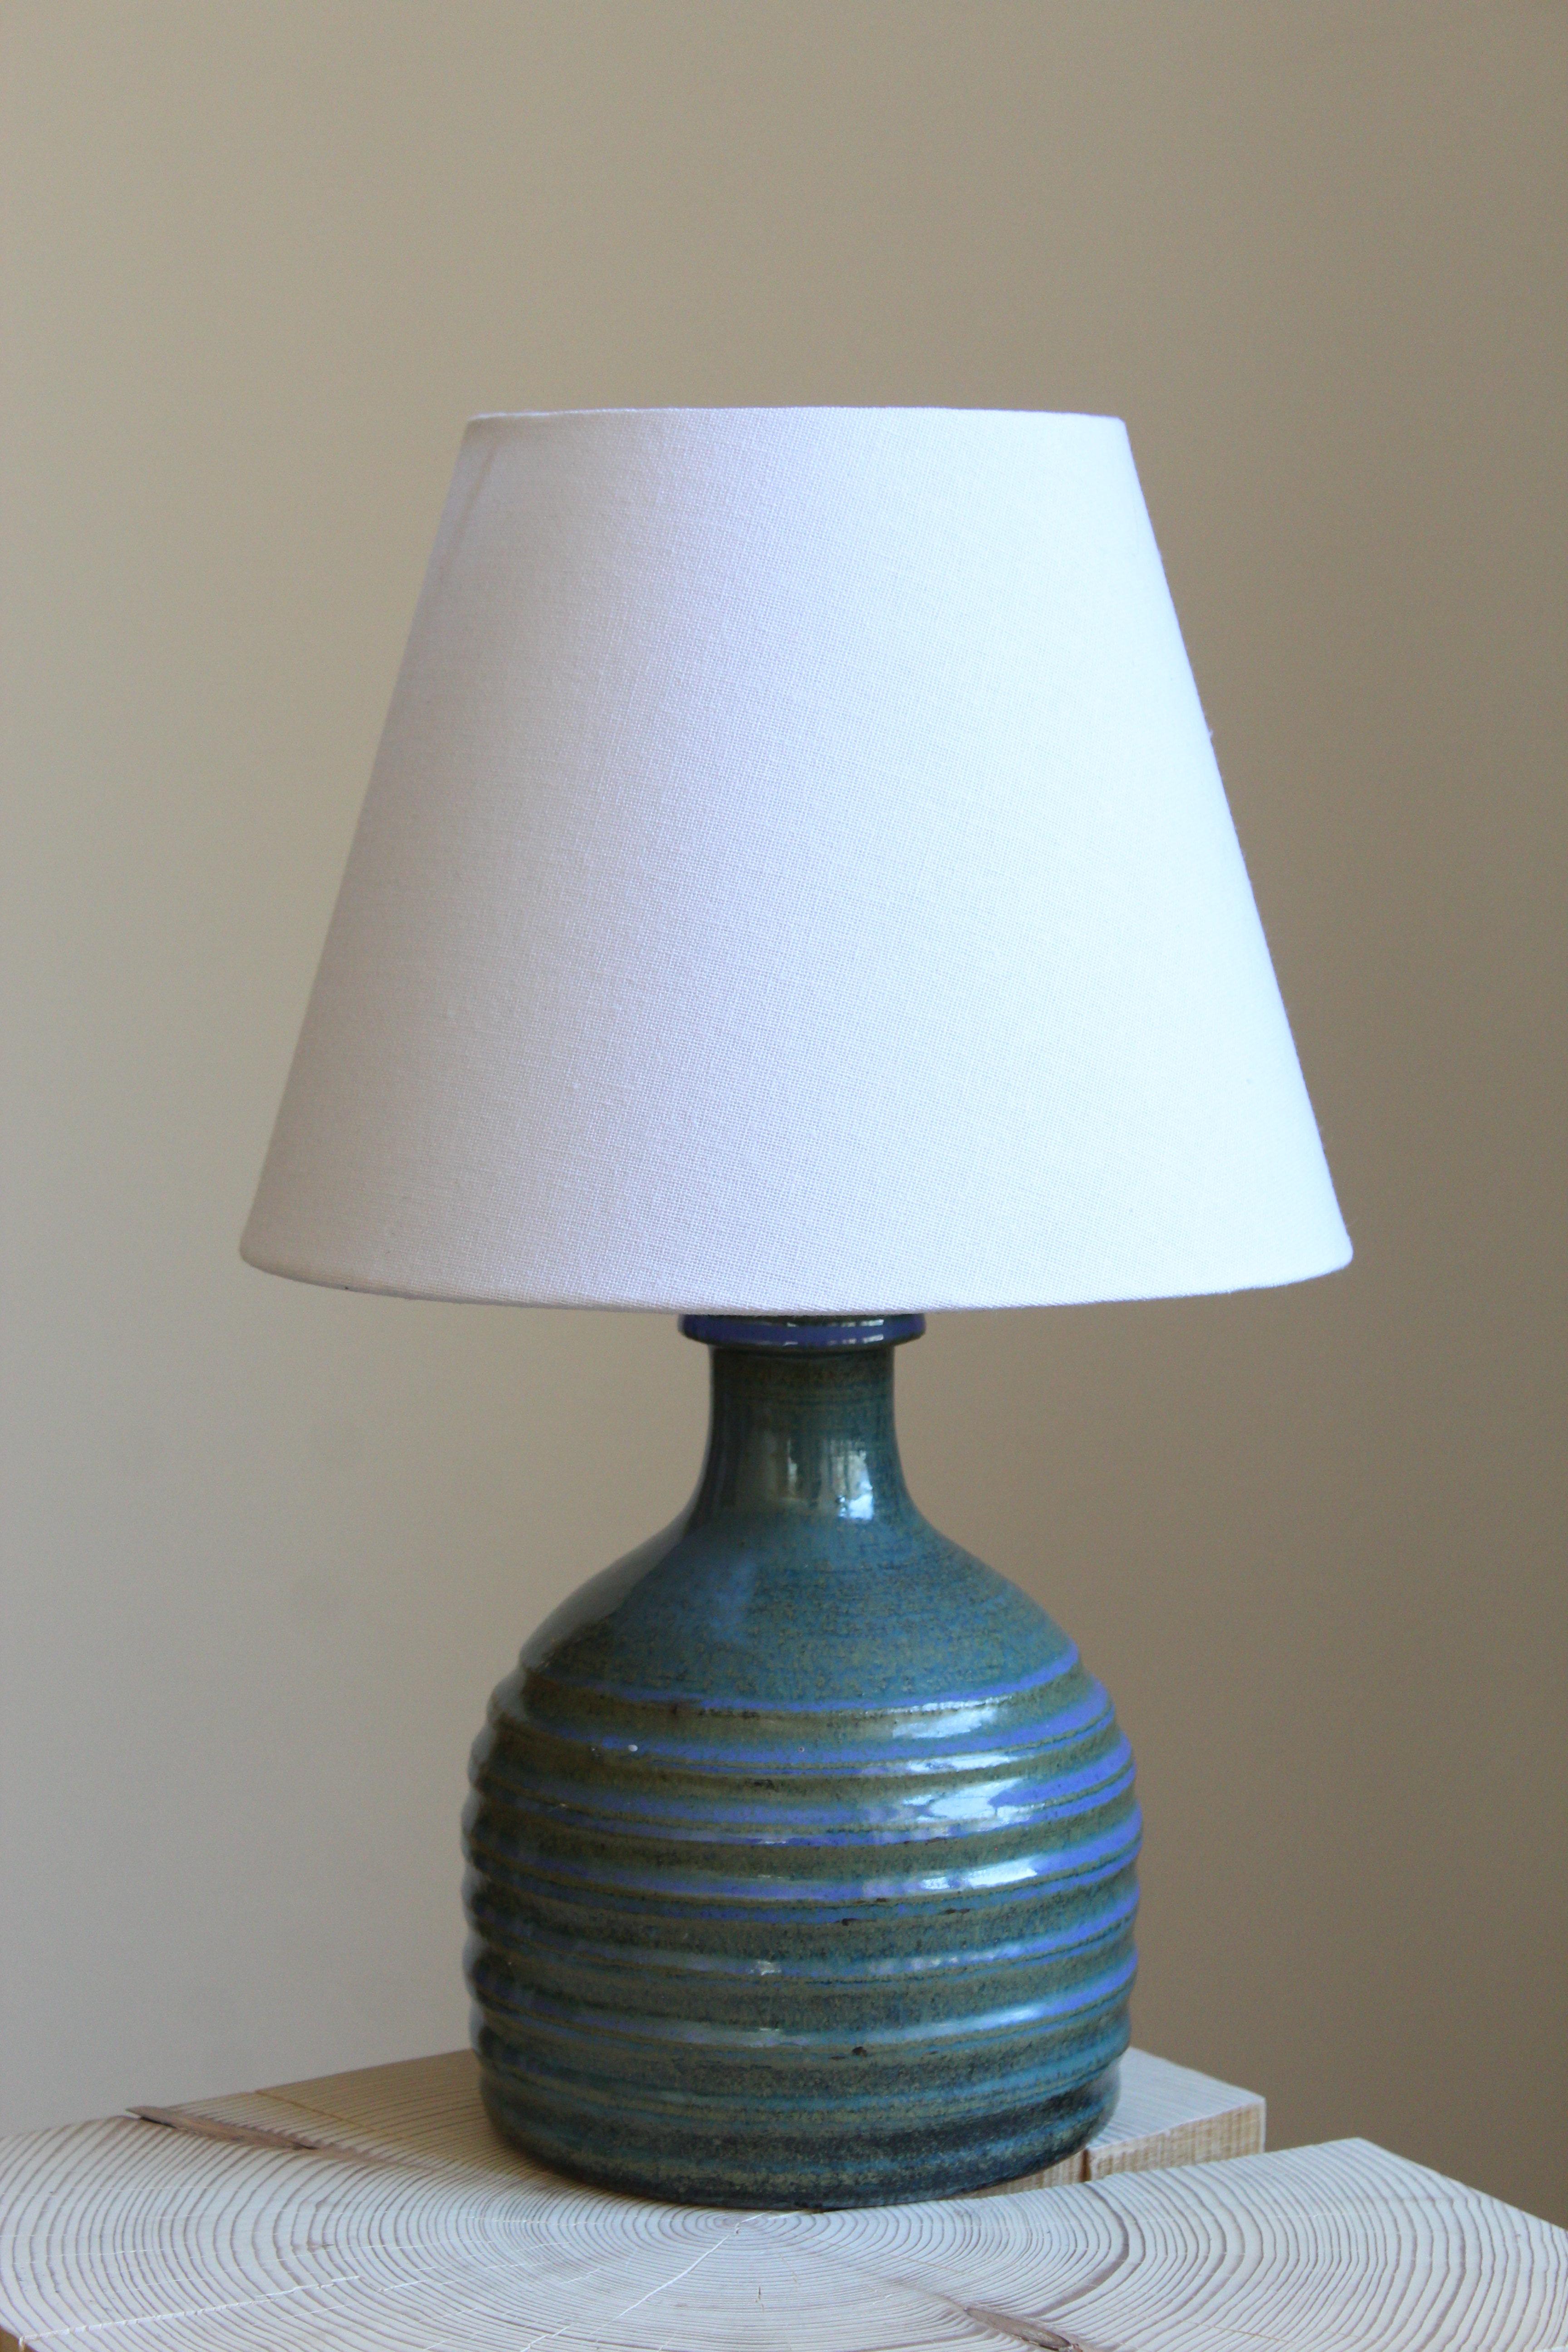 An organically shaped sizable stoneware table lamp by Sven Wejsfelt for the iconic Swedish firm Gustavsberg. Signed. Sold without lampshade.

Glaze features a blue-green color.

Other ceramicists of the period include Berndt Friberg, Axel Salto,